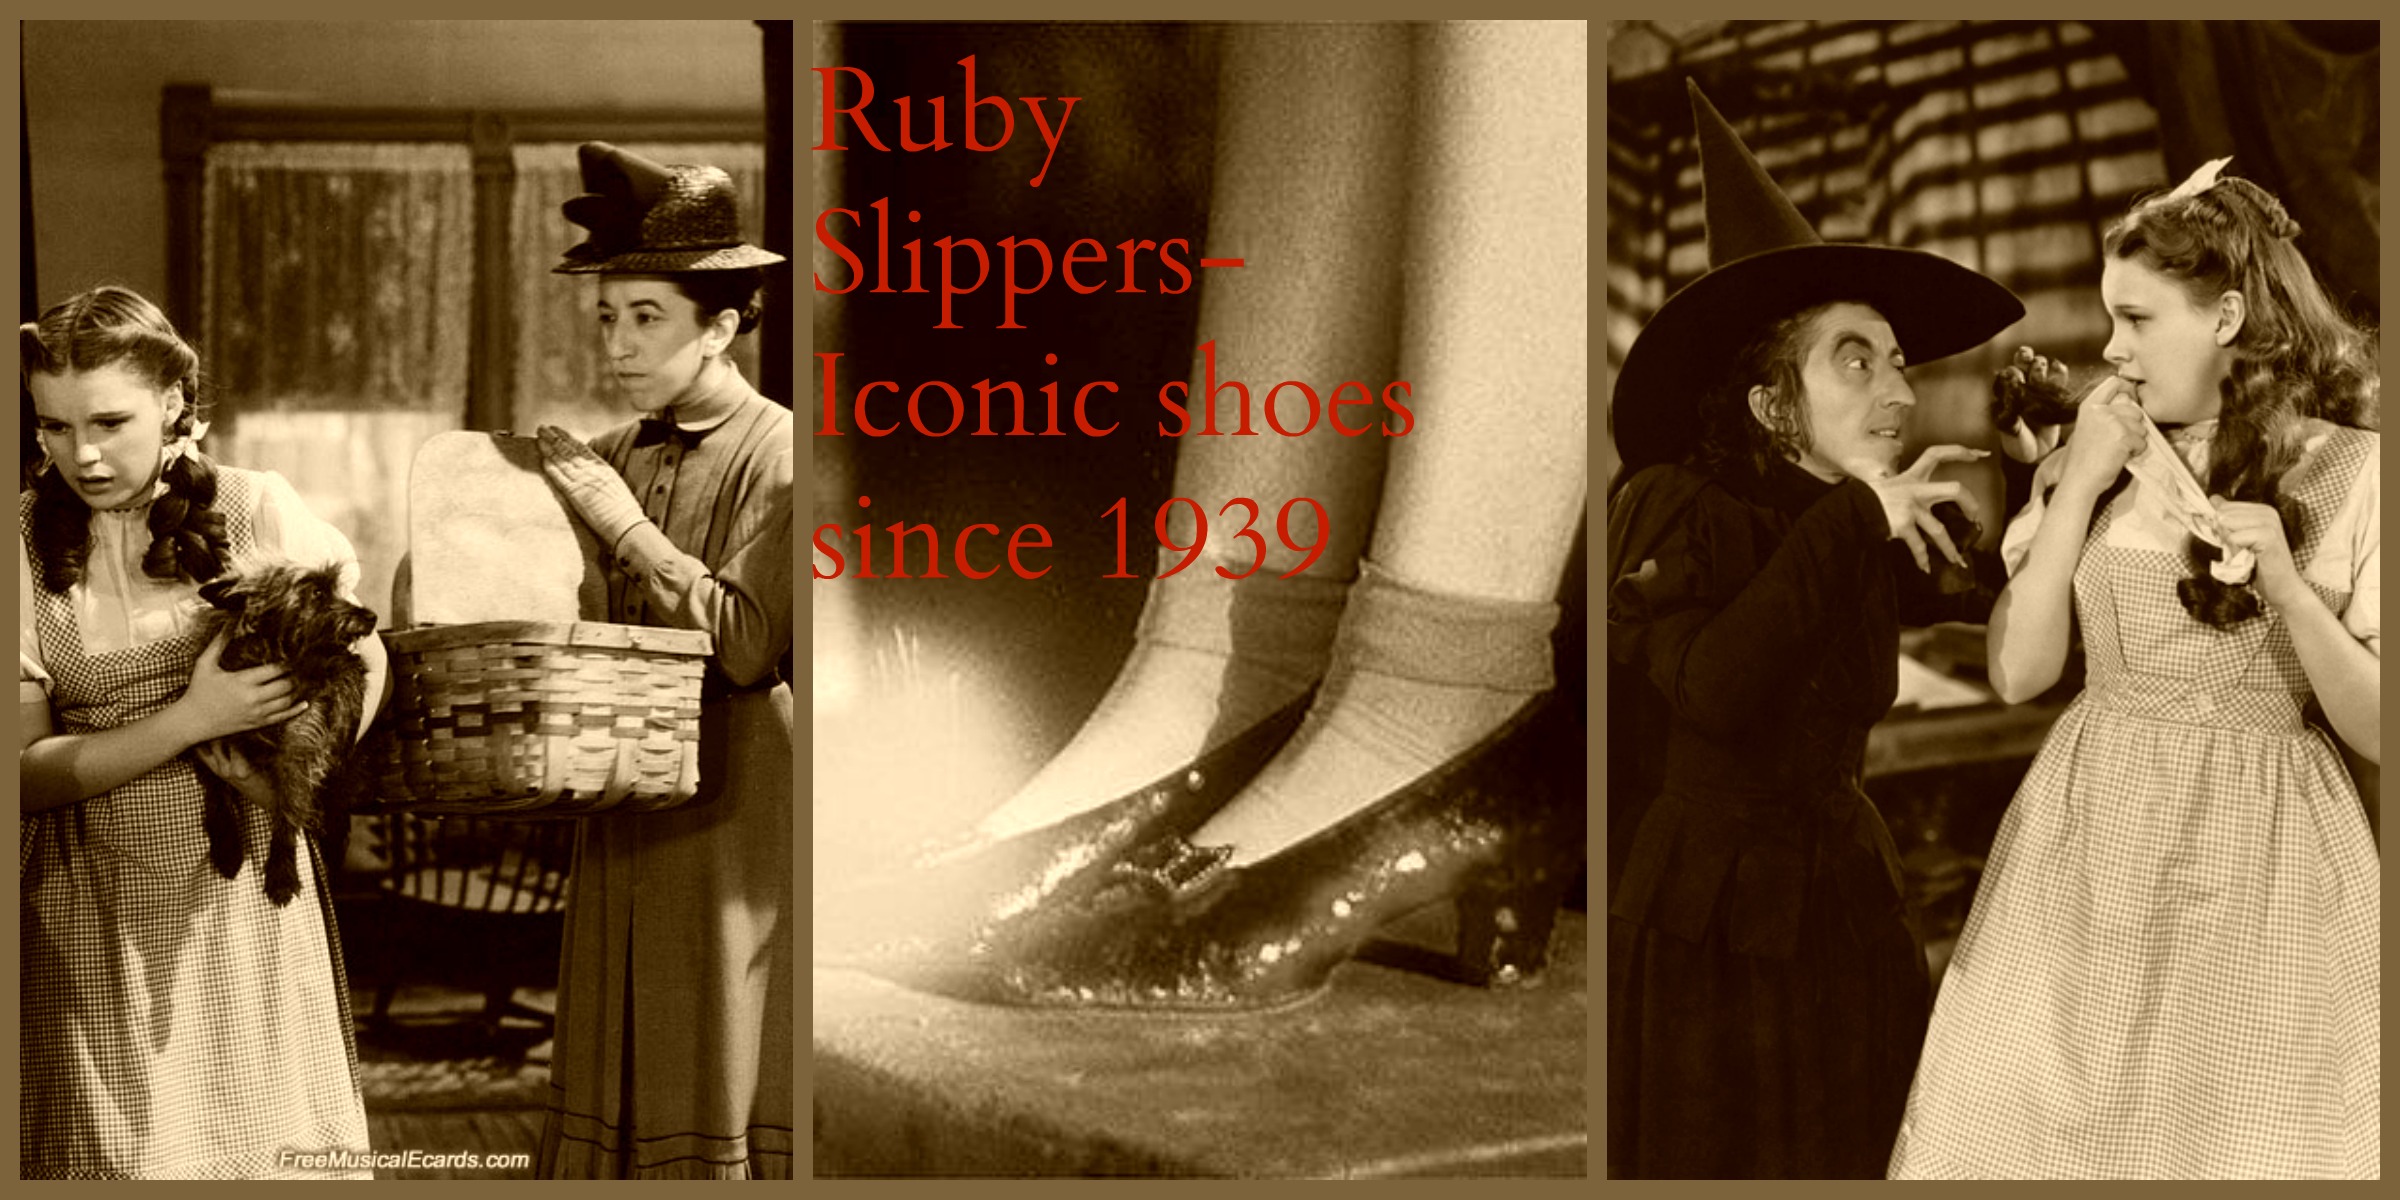 Wiz of Oz/ Ruby Slippers tribute collage